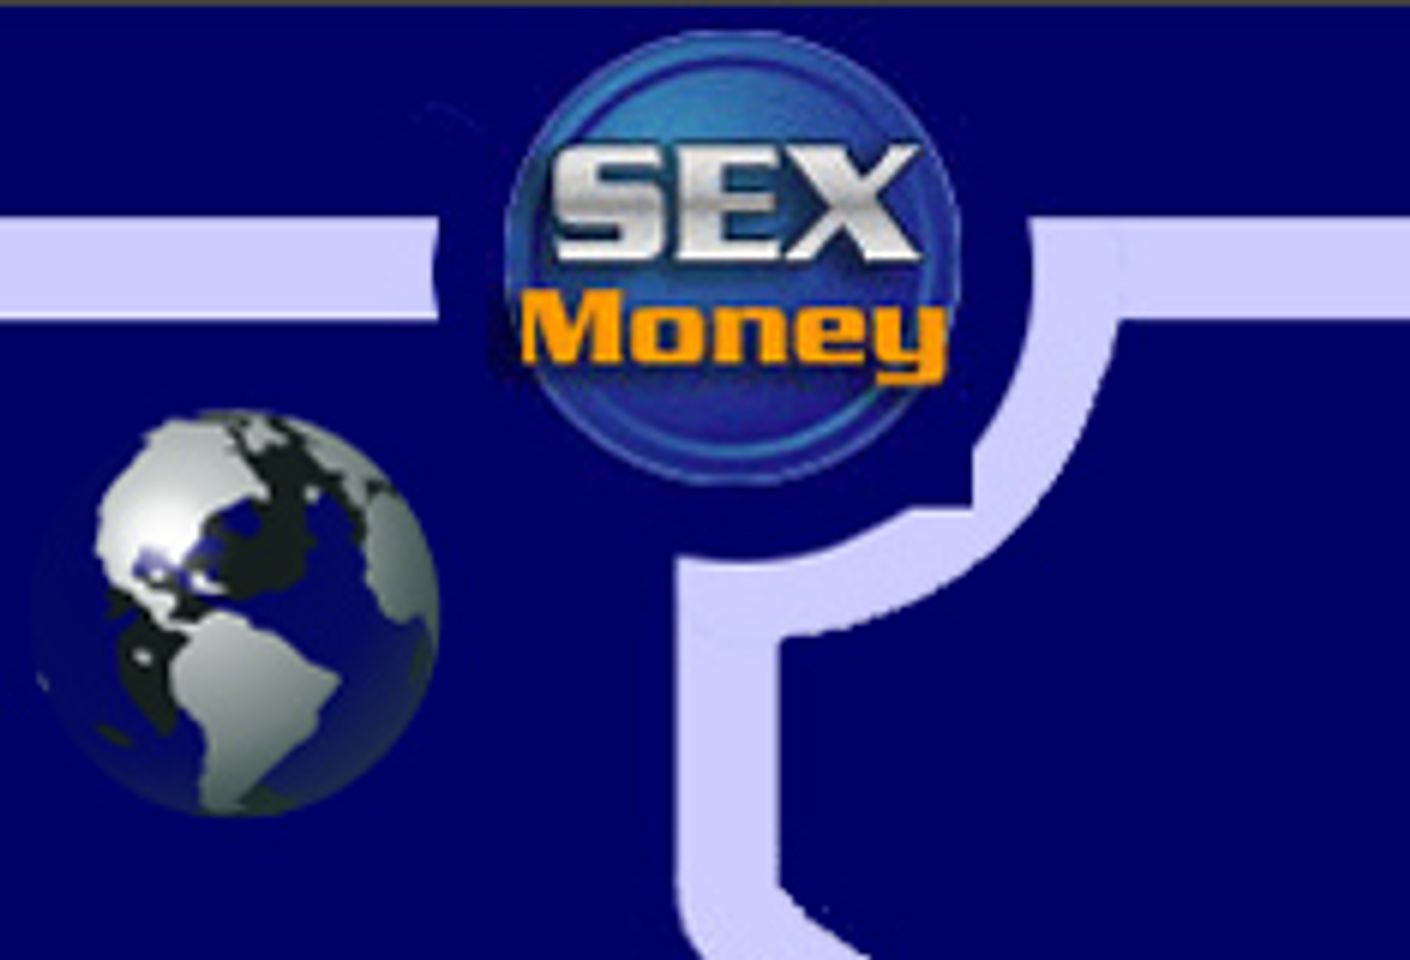 SEXMoney.com Offering $30 Flat Payouts